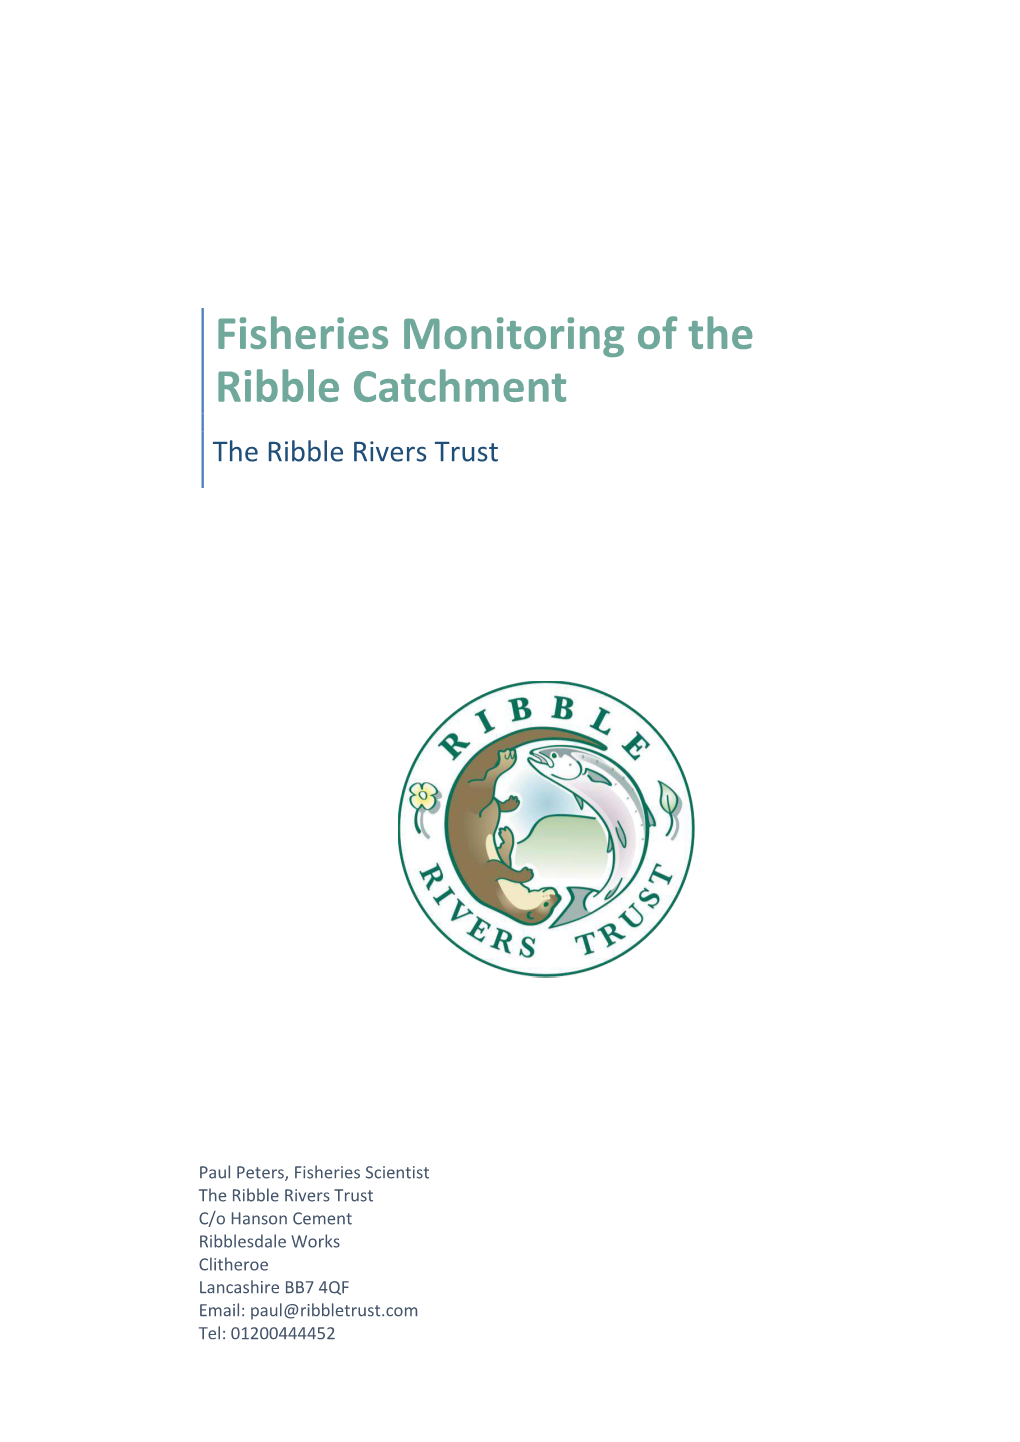 Fisheries Monitoring of the Ribble Catchment